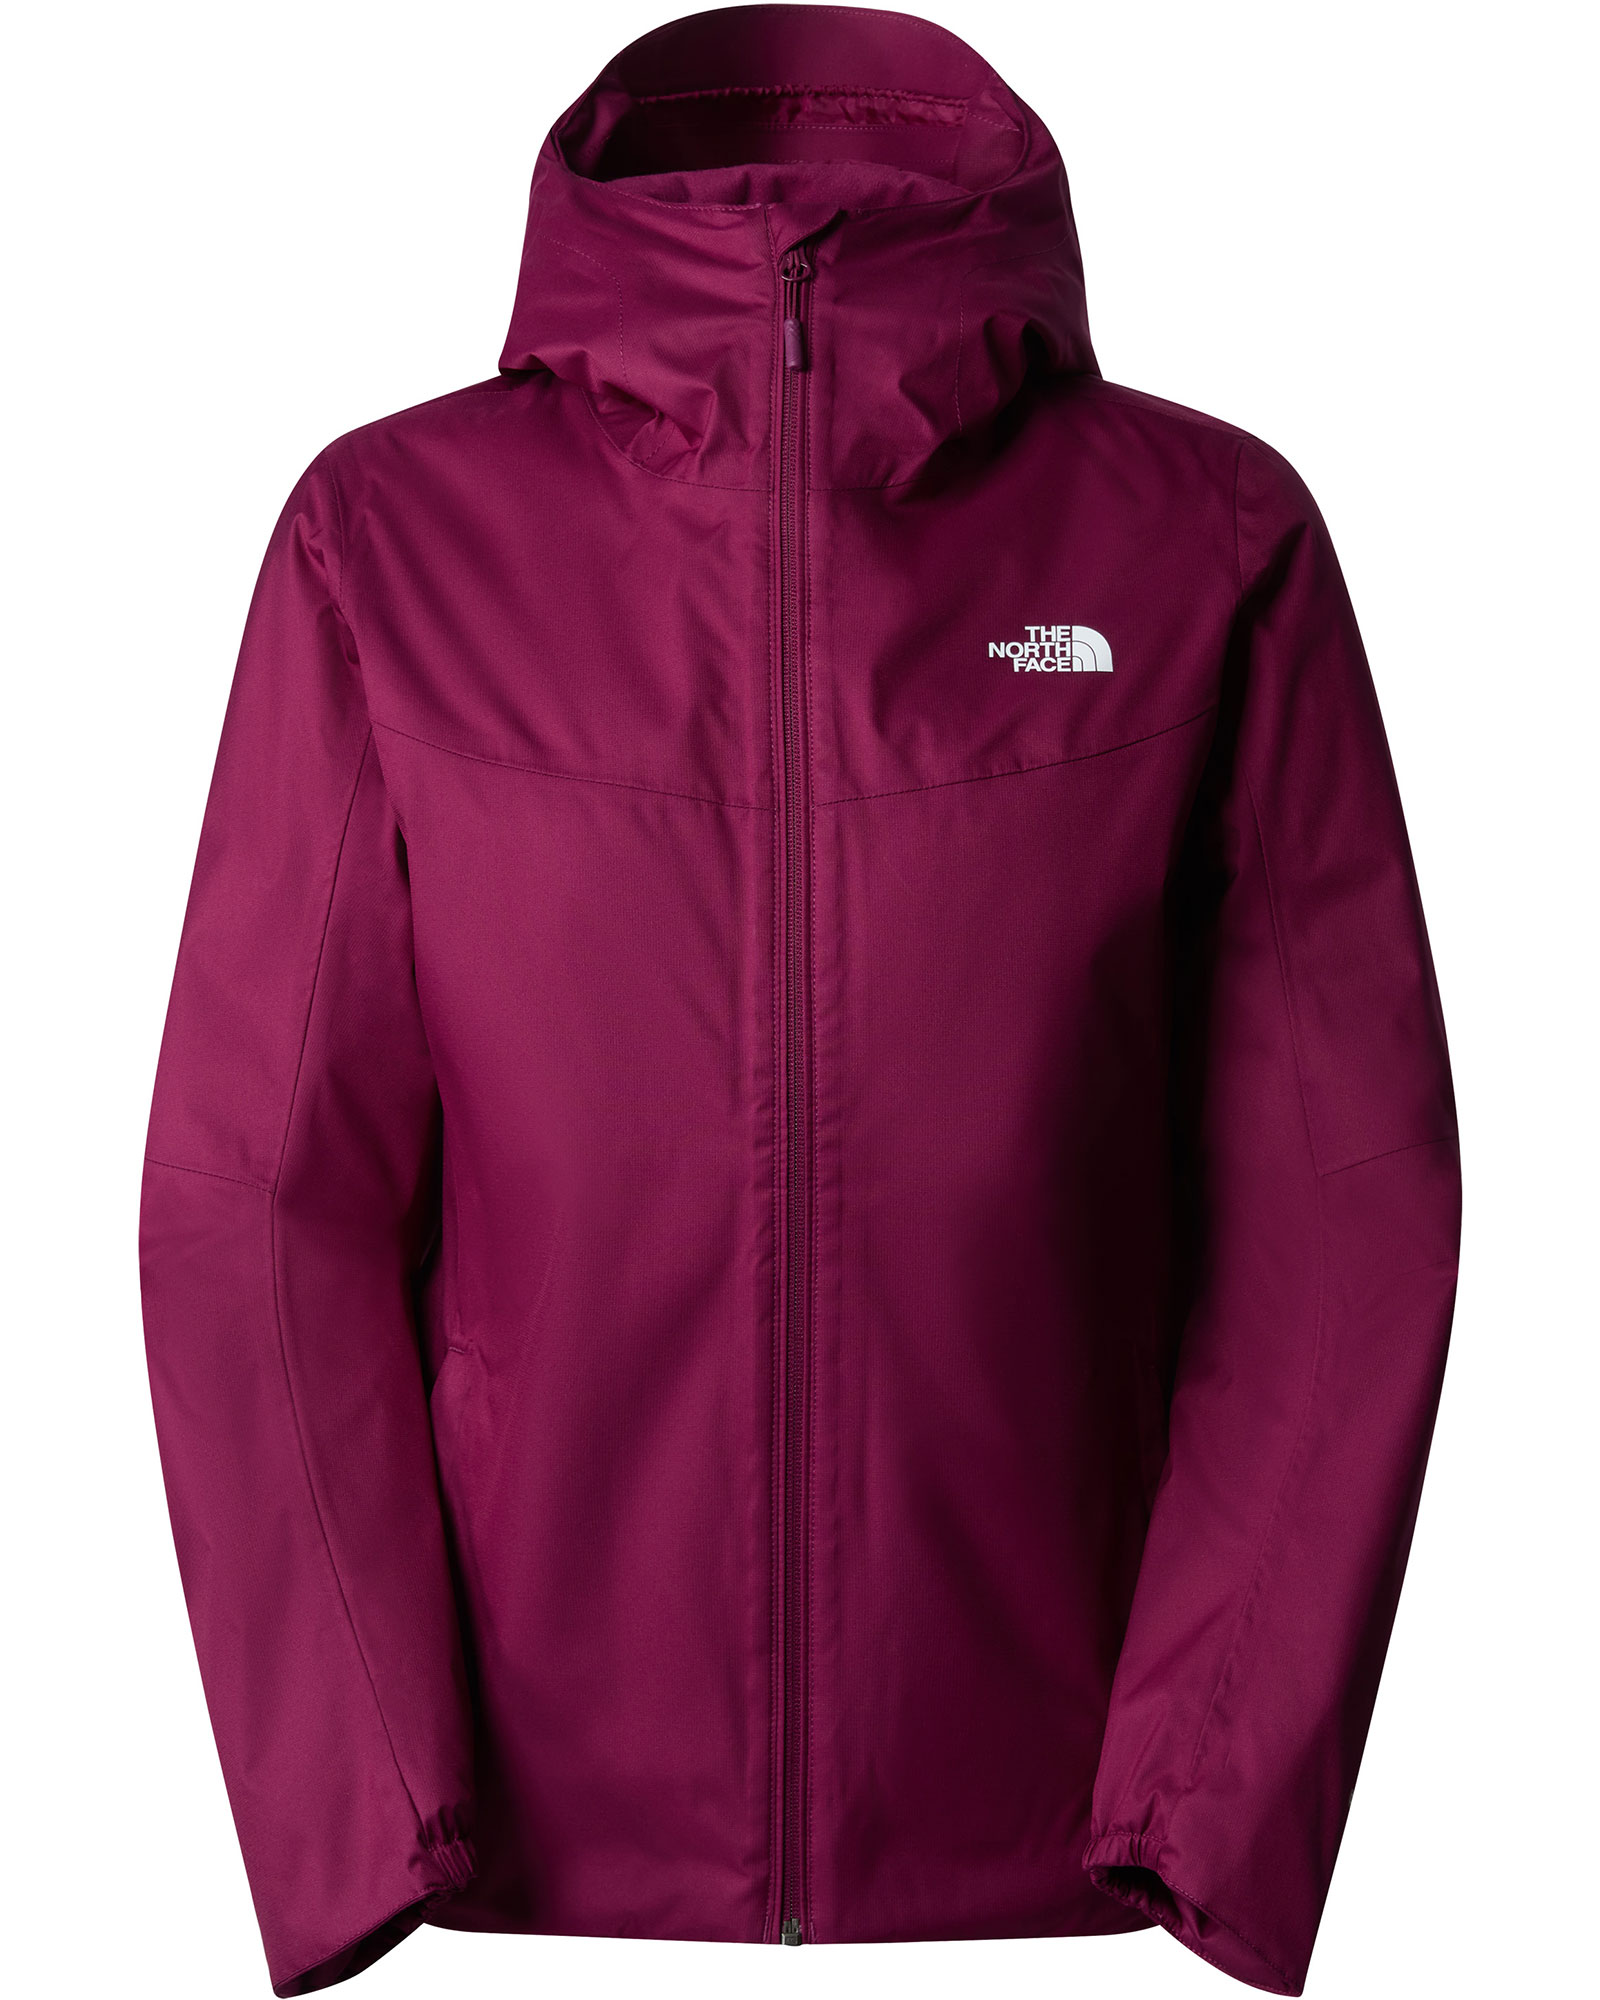 The North Face Quest DryVent Women’s Insulated Jacket - Boysenberry M